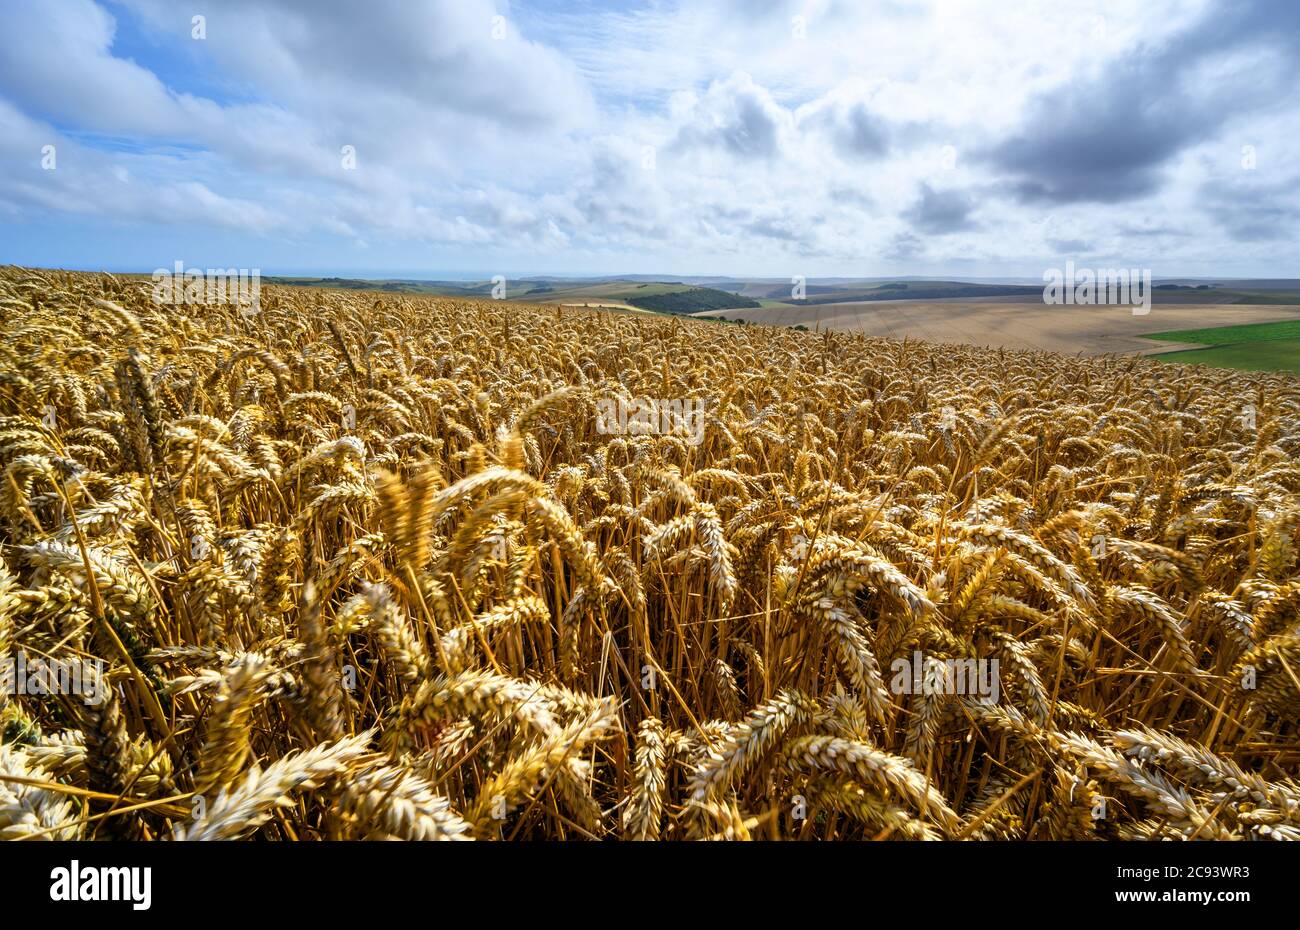 South Downs National Park, Sussex, England, UK. Wheat field near Firle Beacon and Newhaven with views to the coast. Close up of wheat with movement Stock Photo